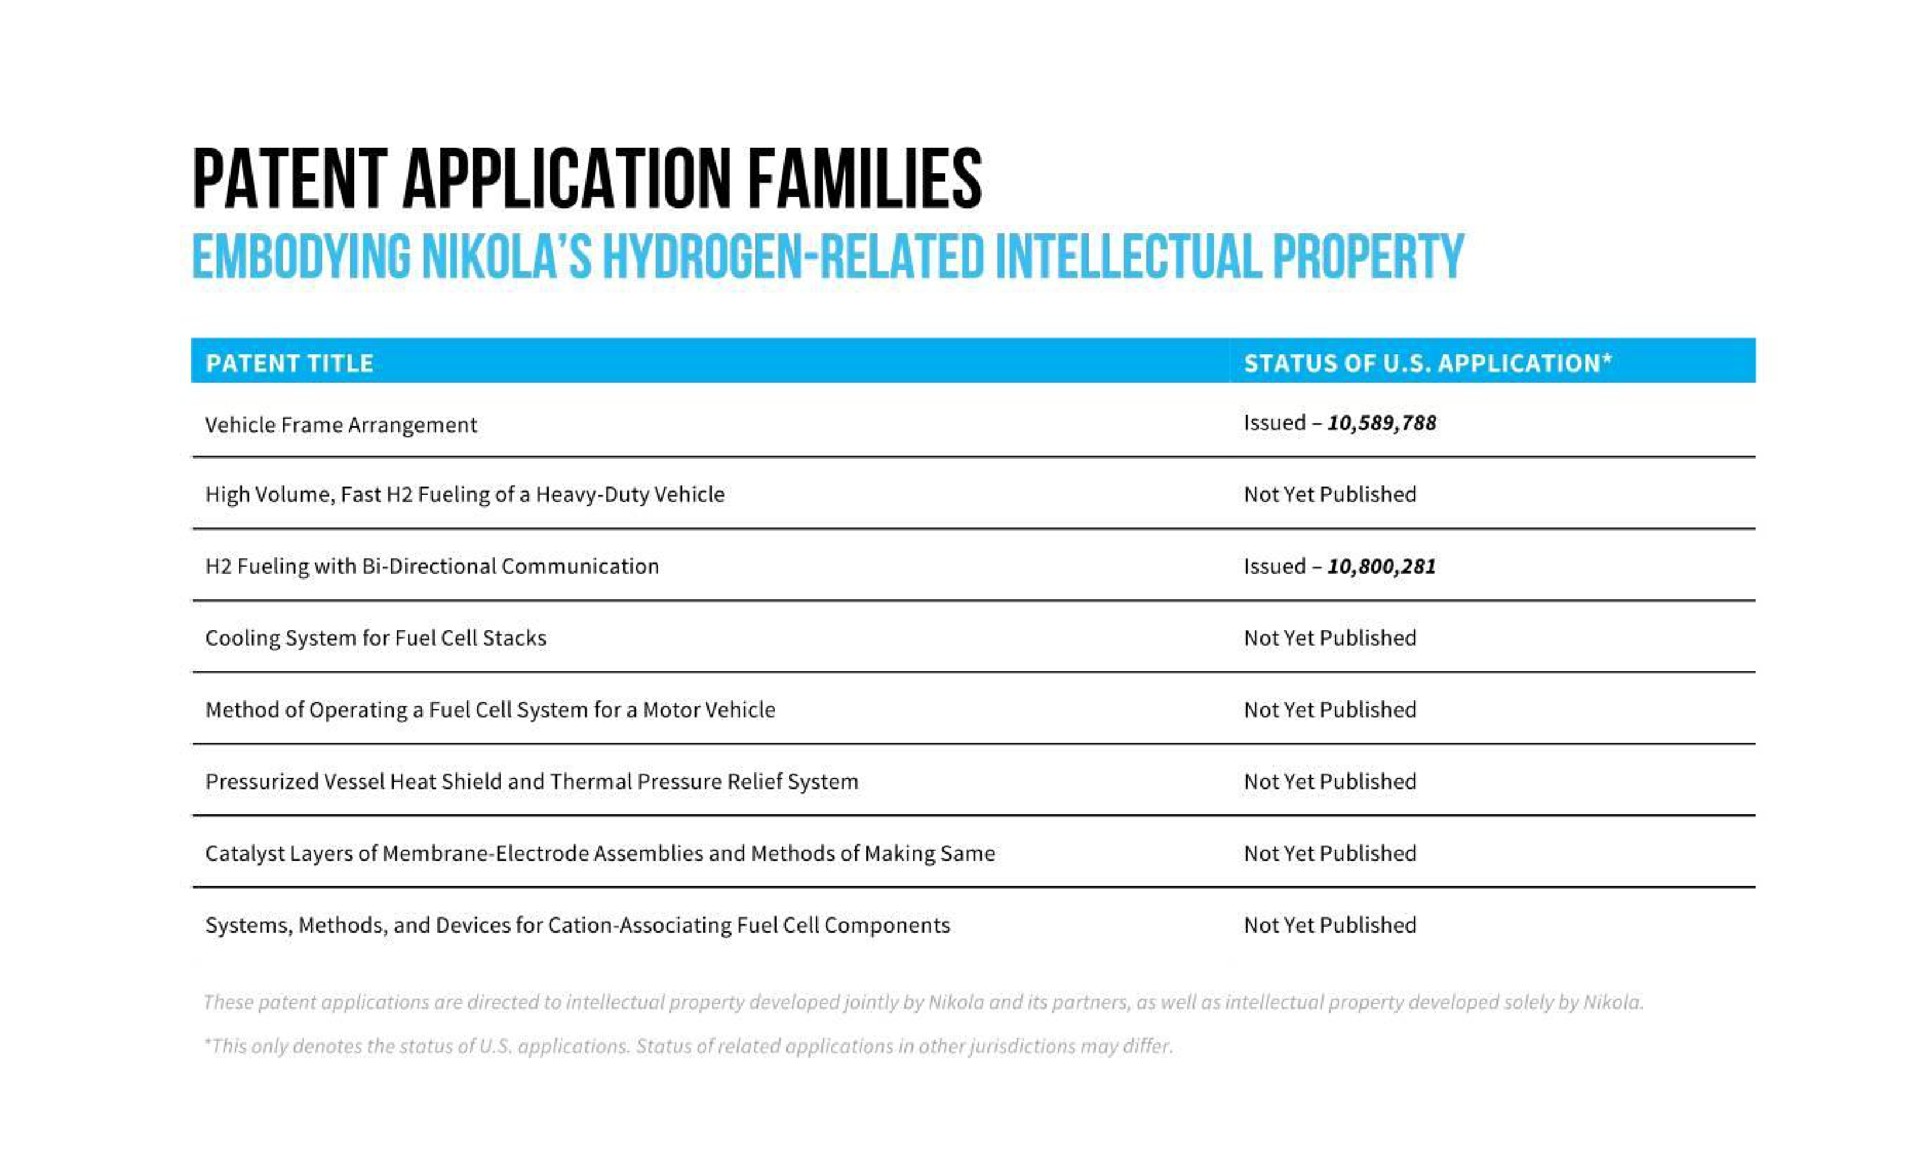 patent application families embodying hydrogen related intellectual property | Nikola